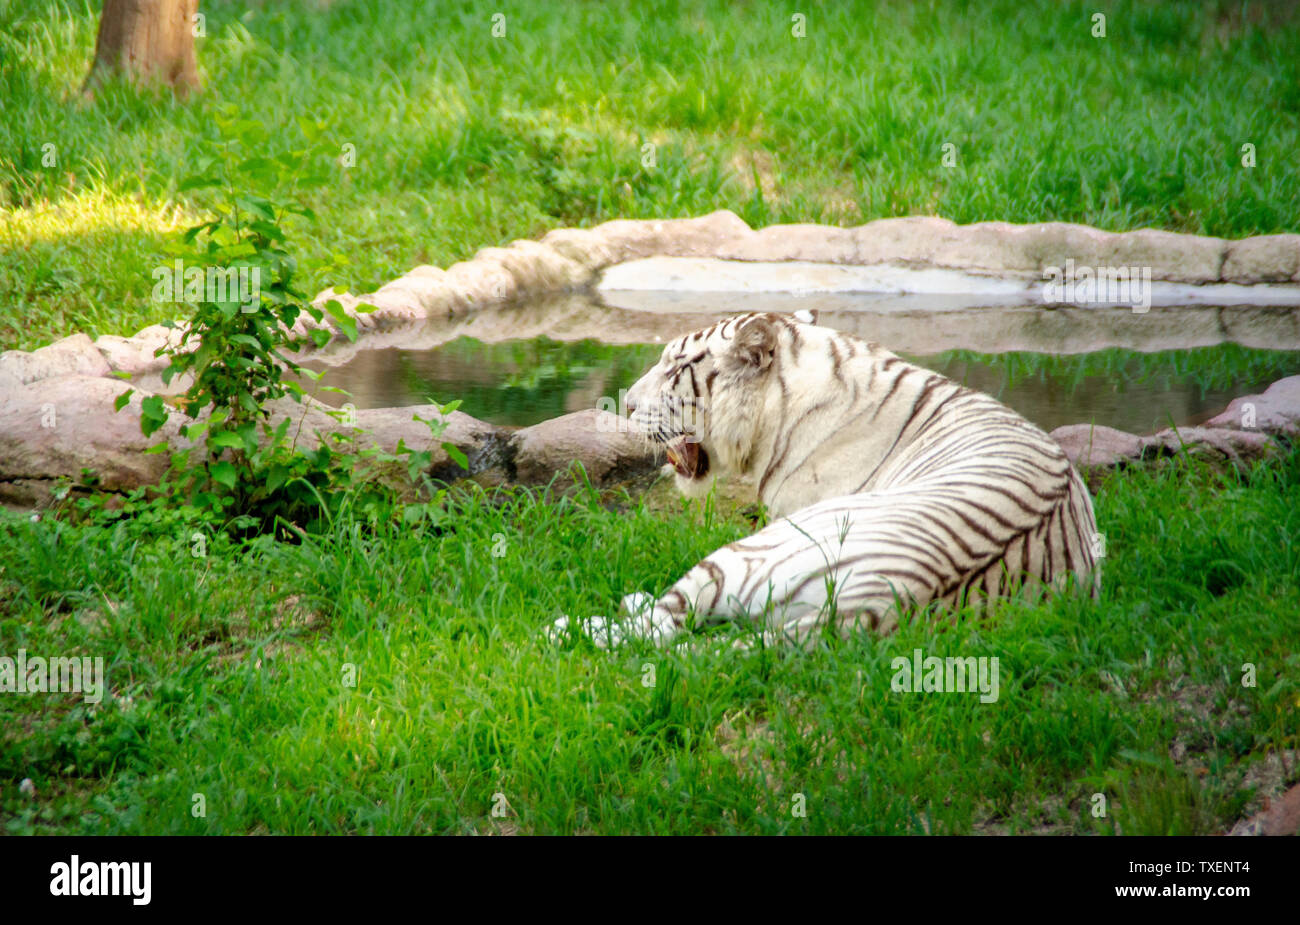 A tiger lying in the woods and roaring in the grass. Stock Photo